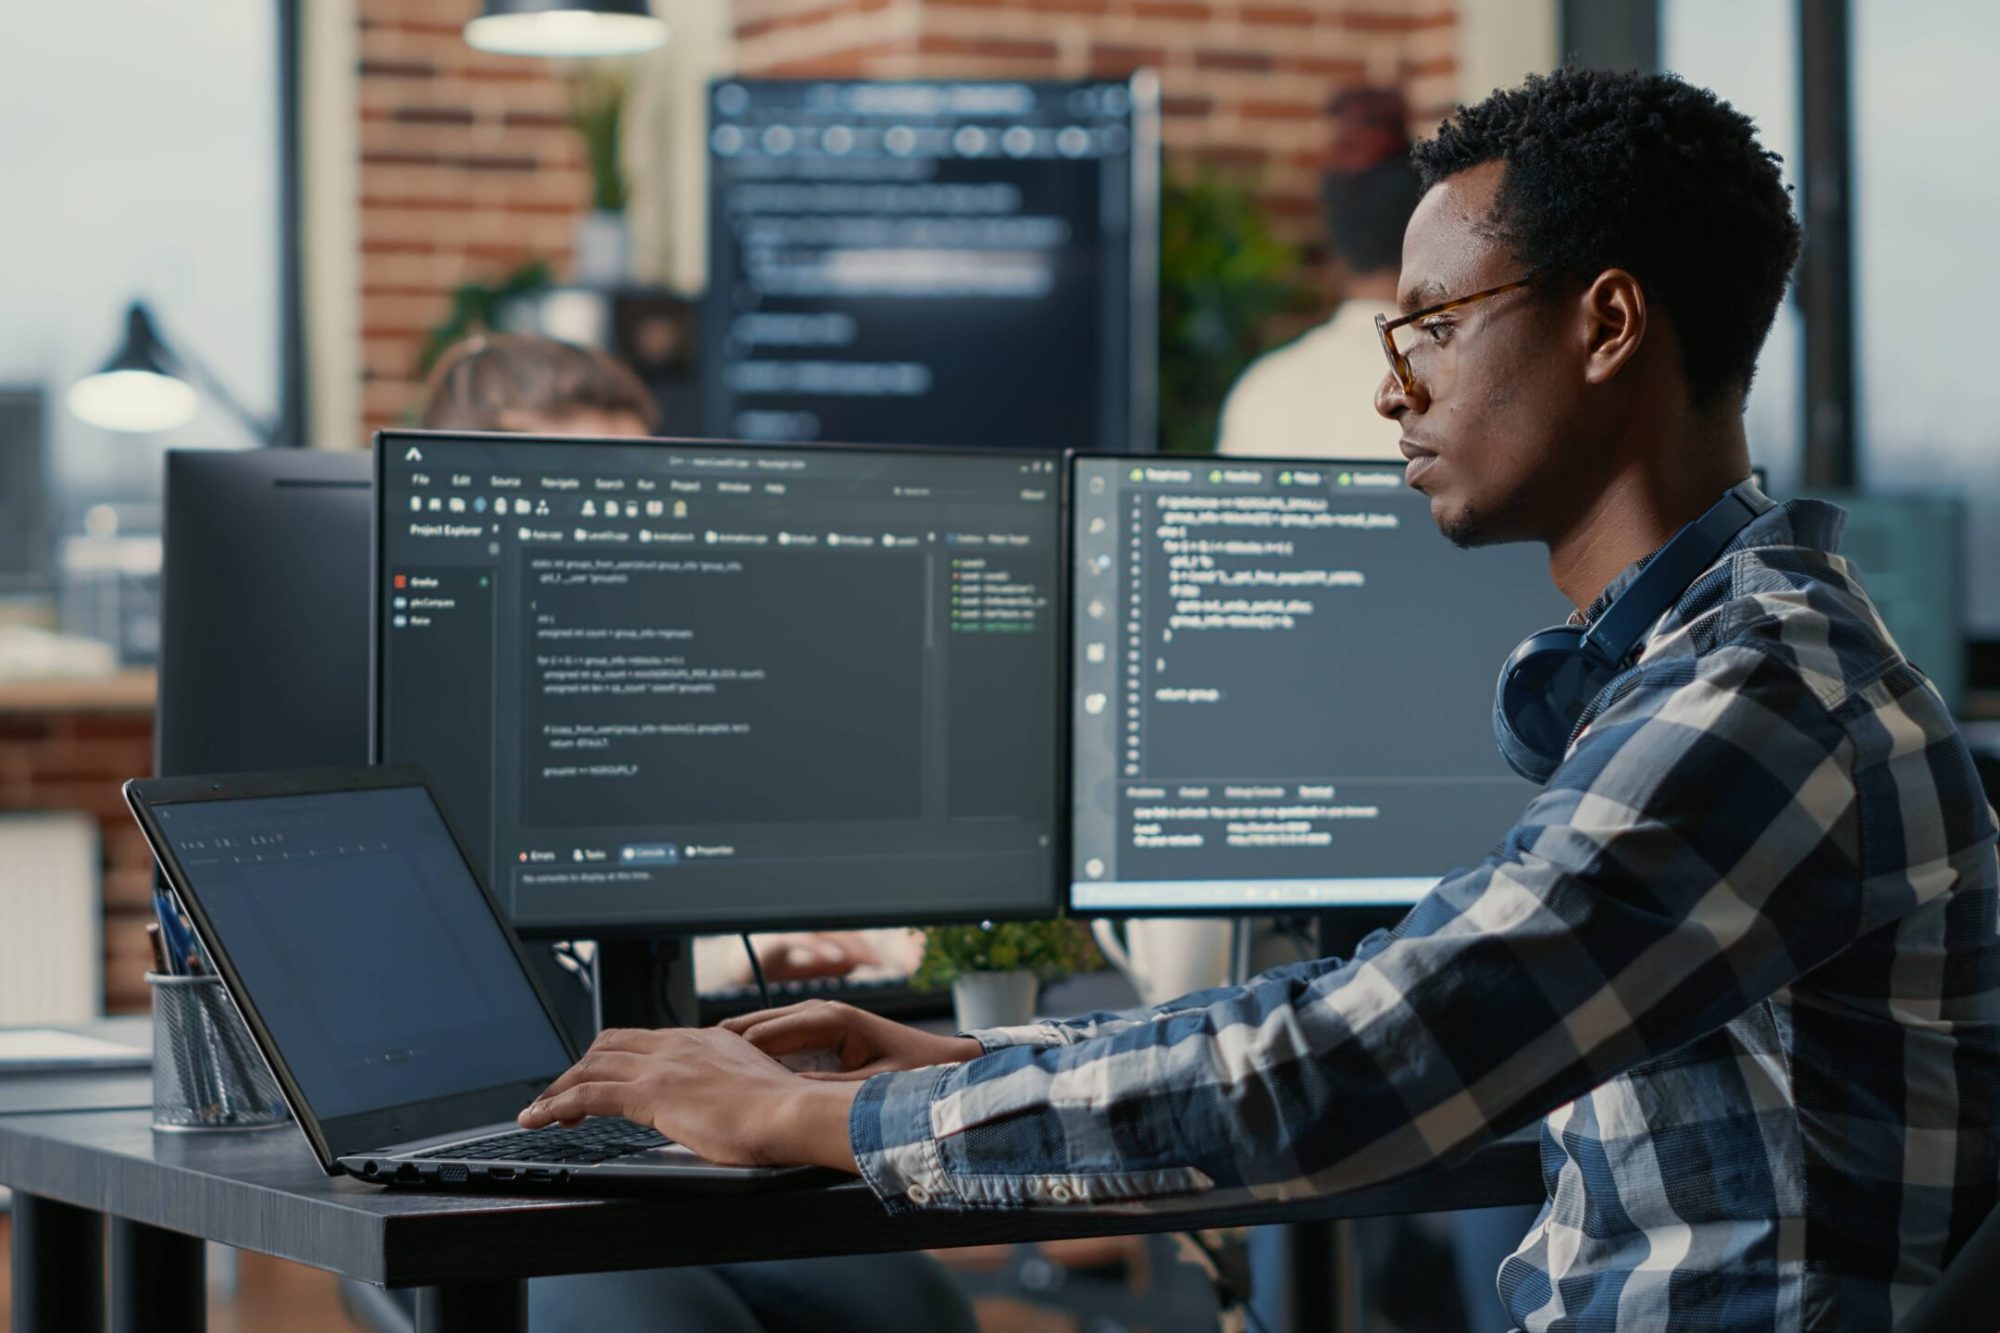 Nephsonic_portrait-african-american-developer-using-laptop-write-code-sitting-desk-with-multiple-screens-parsing-algorithm-software-agency-coder-working-user-interface-using-portable-computer